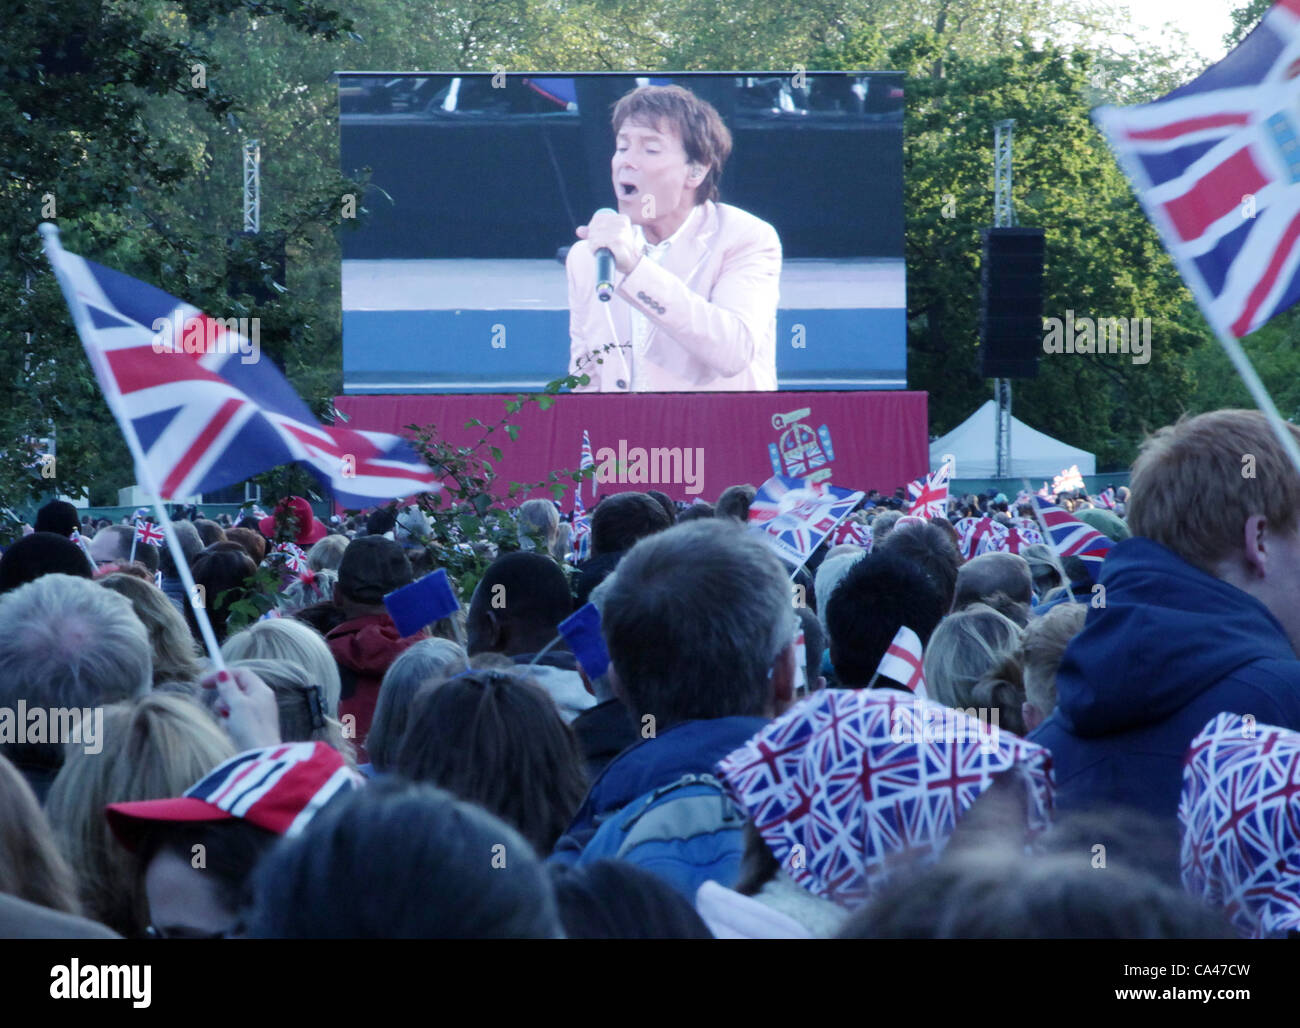 London, UK. June 4, 2012. Fans in London, enjoying Sir Cliff Richard on the big screen in St. James's Park Concert to celebrate The Queen's Diamond Jubilee.  . Stock Photo